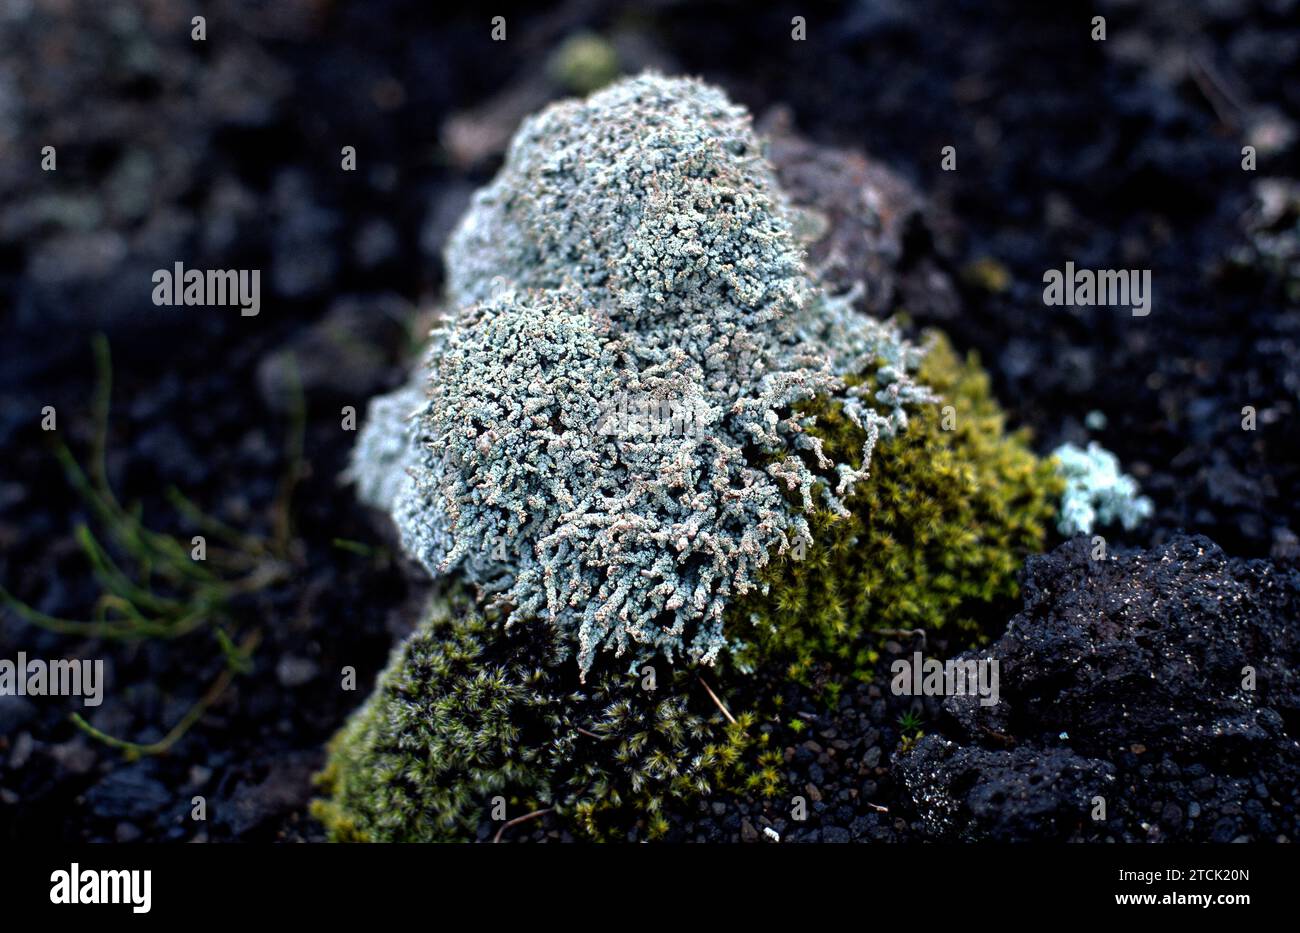 Stereocaulon sp. is a genus of fruticulose lichens. This photo was taken in Iceland. Stock Photo